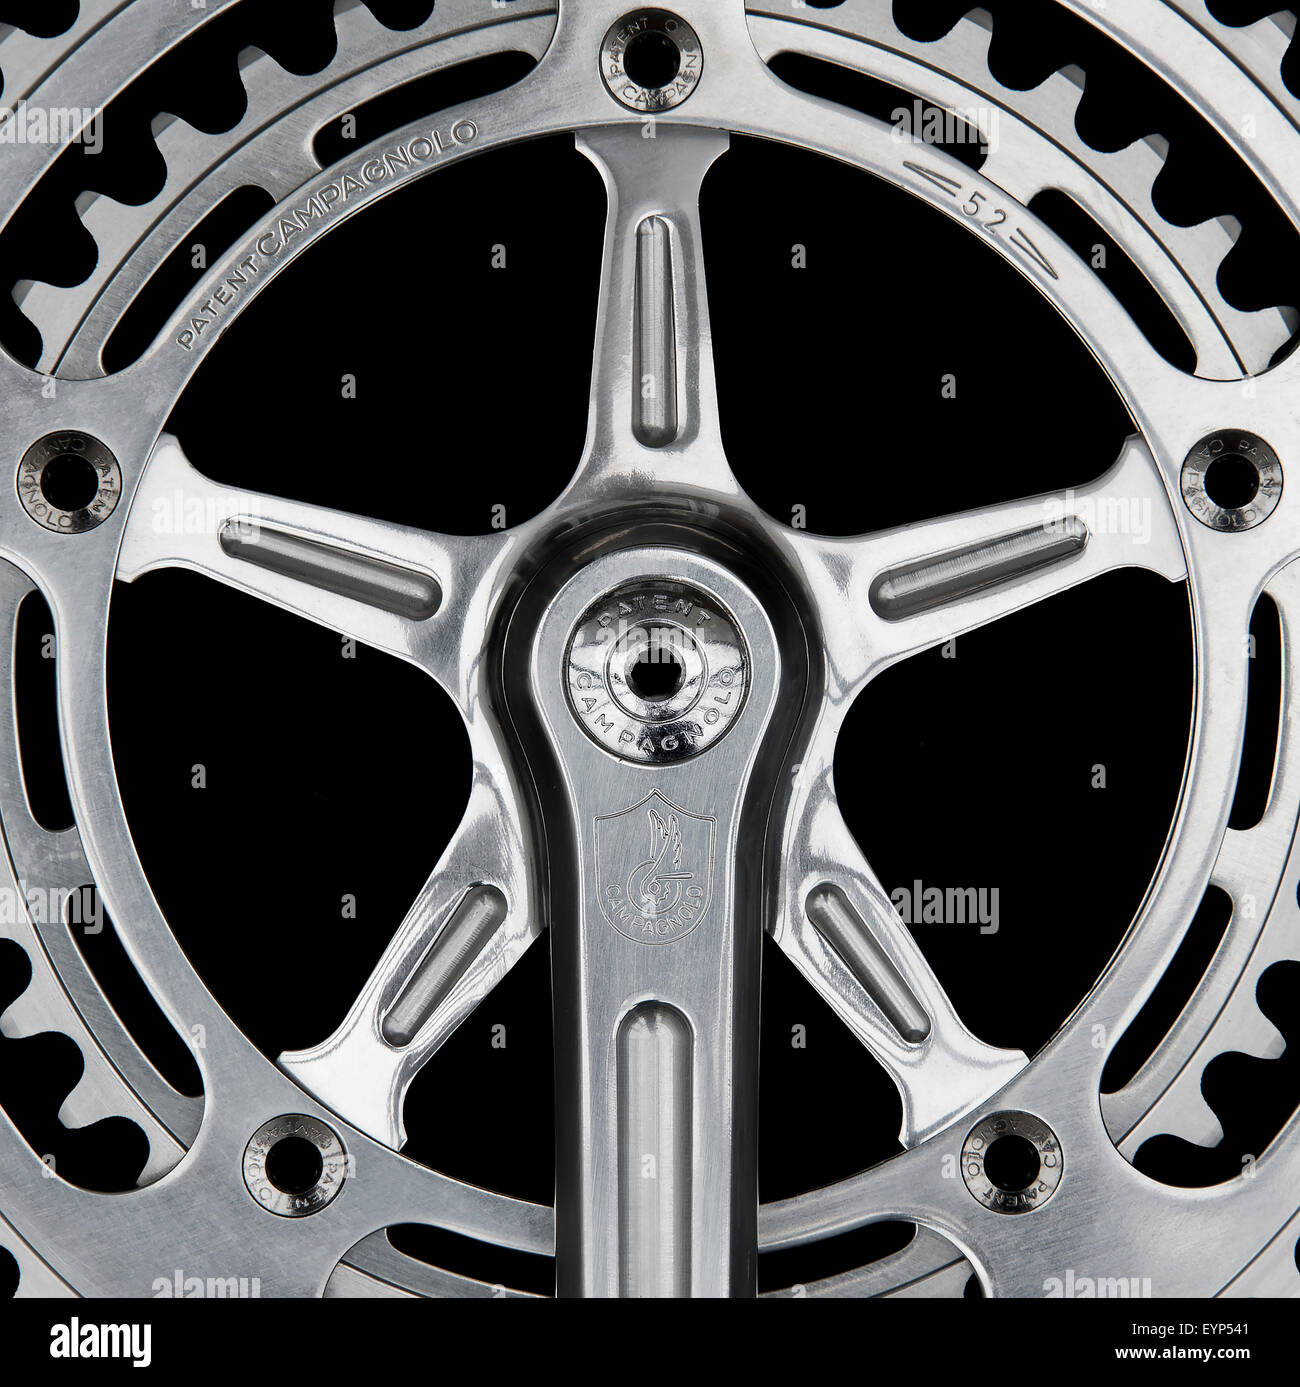 Vintage Campagnolo Record chainset from the 1970's Stock Photo - Alamy